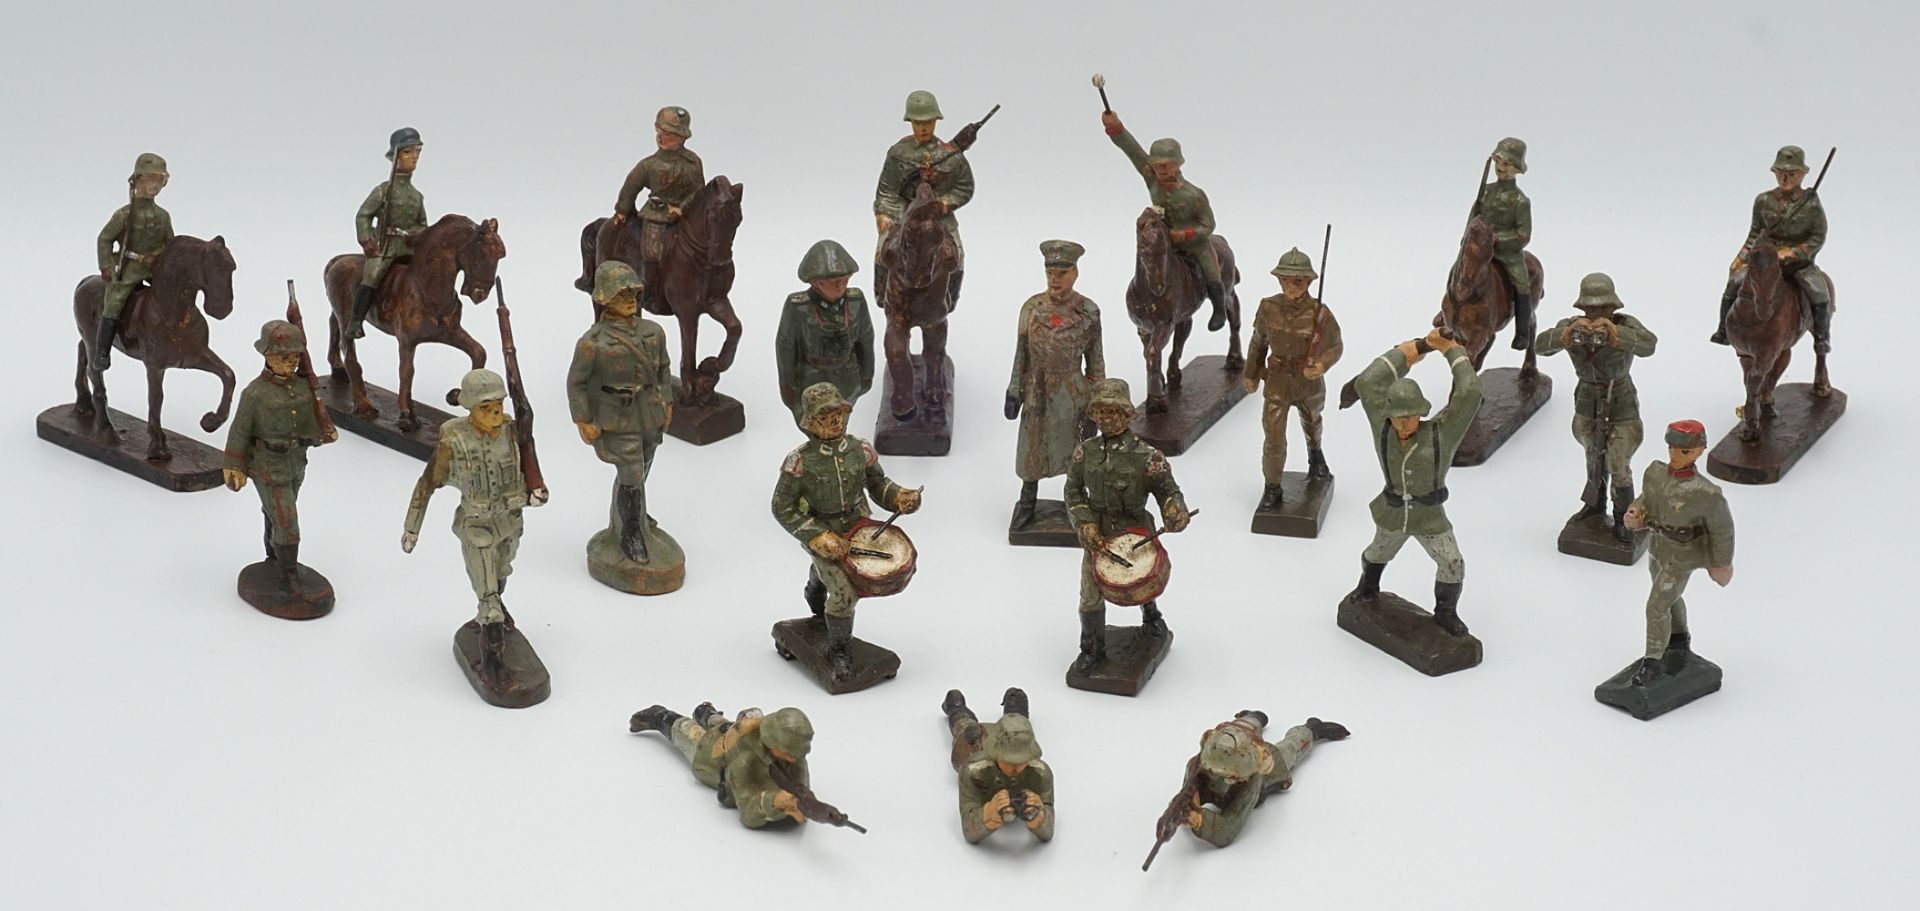 20 soldiers / mass figures